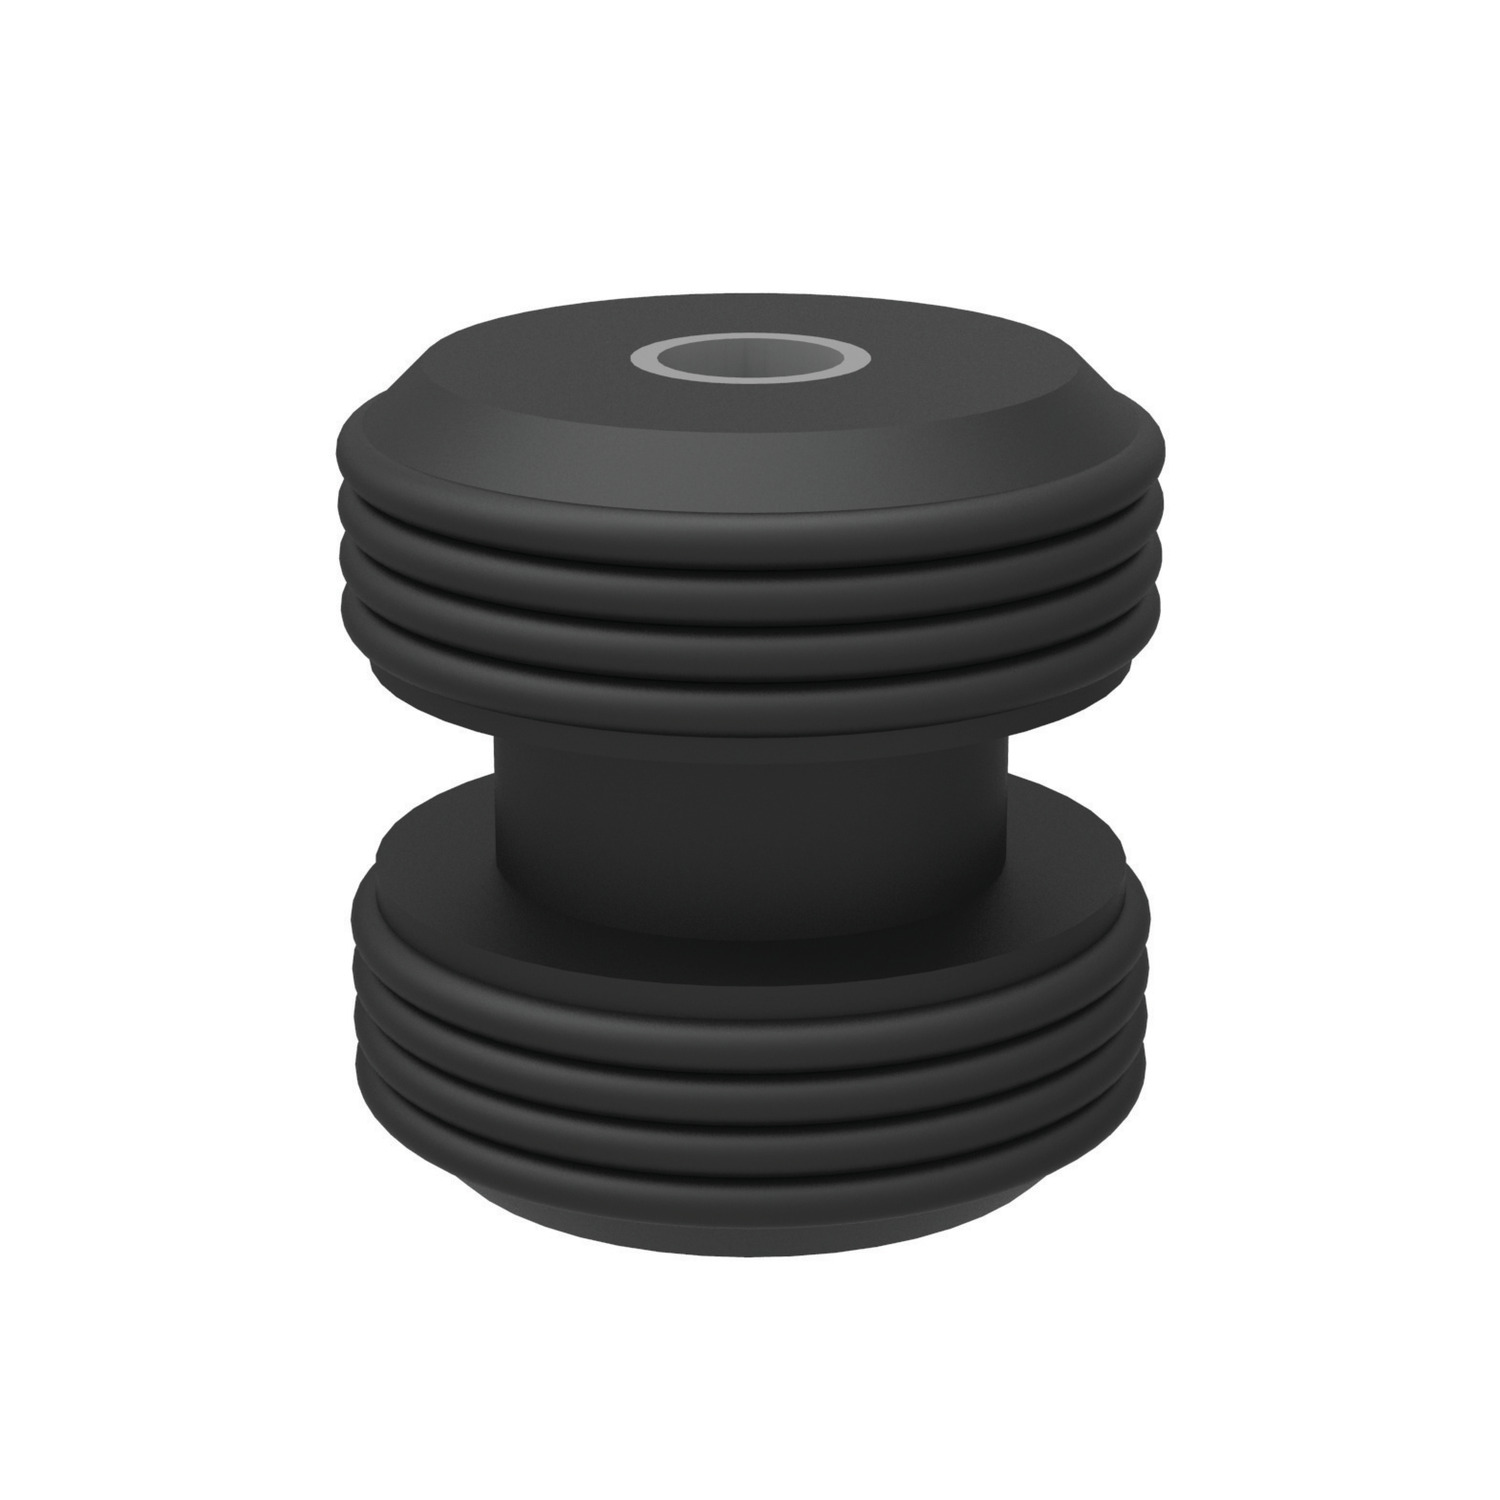 Product 61855, Anti-vibration Bushes rubber, two-piece / 